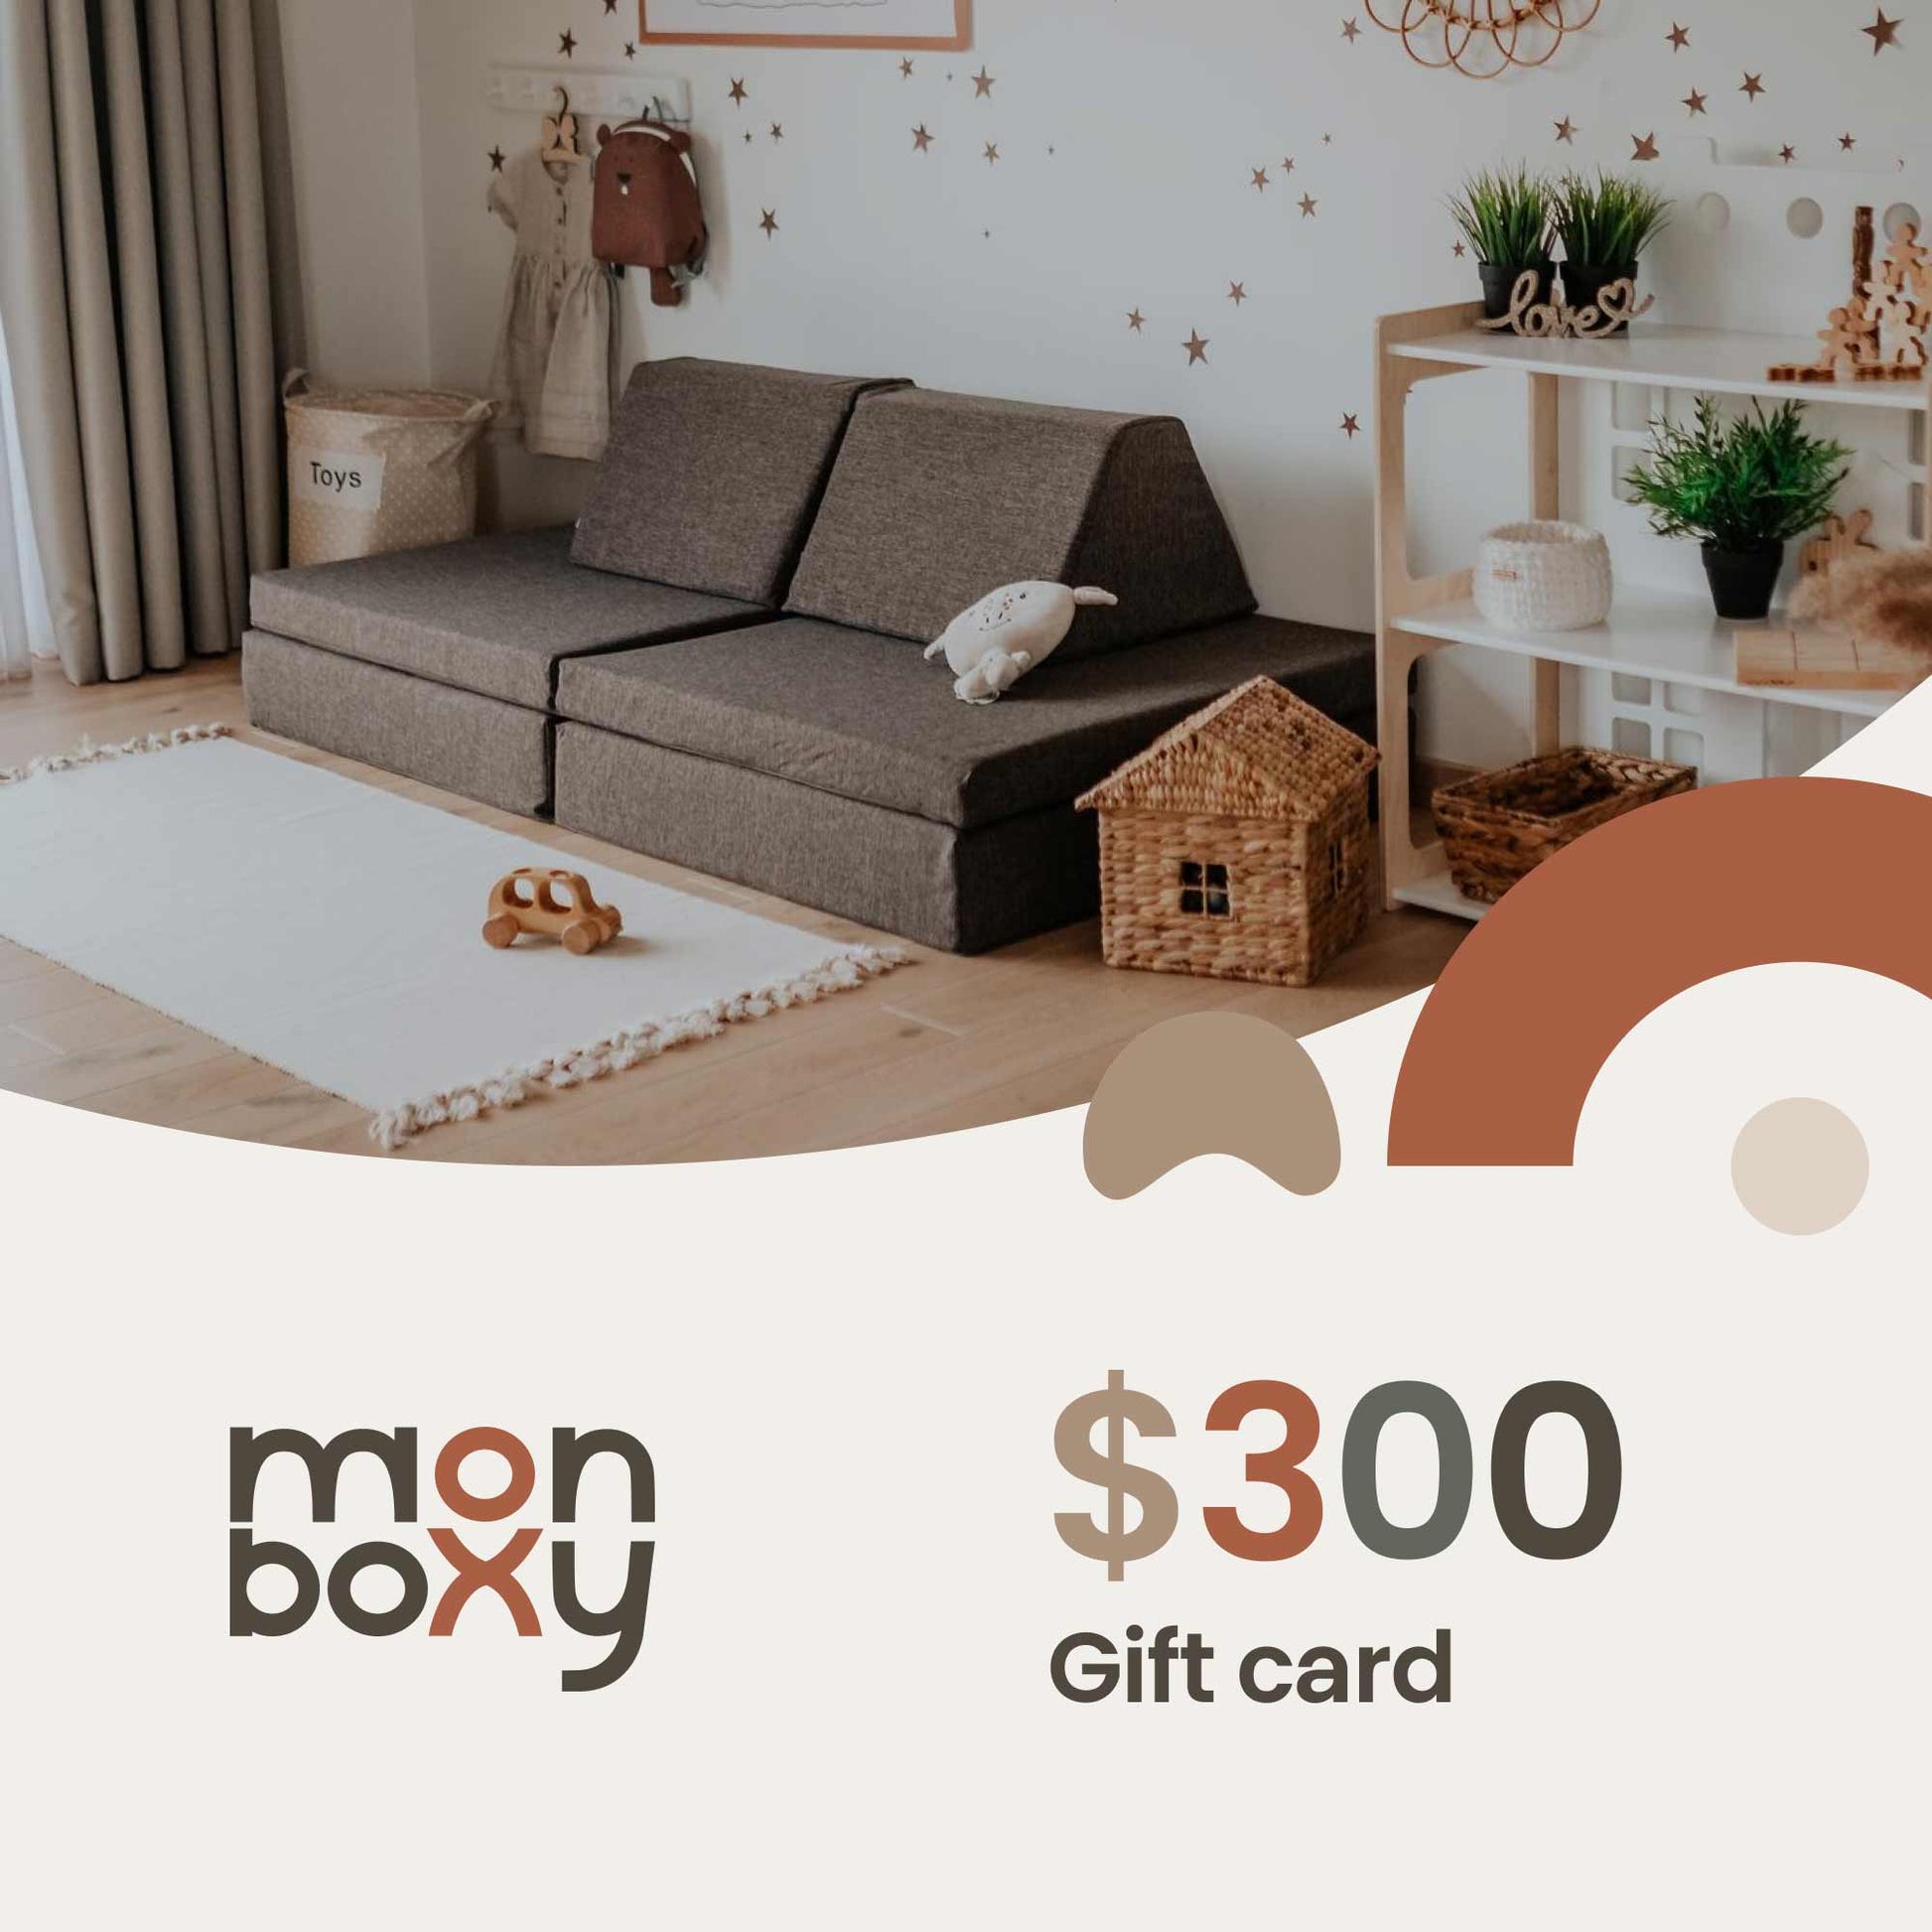 $300 Monboxy gift card